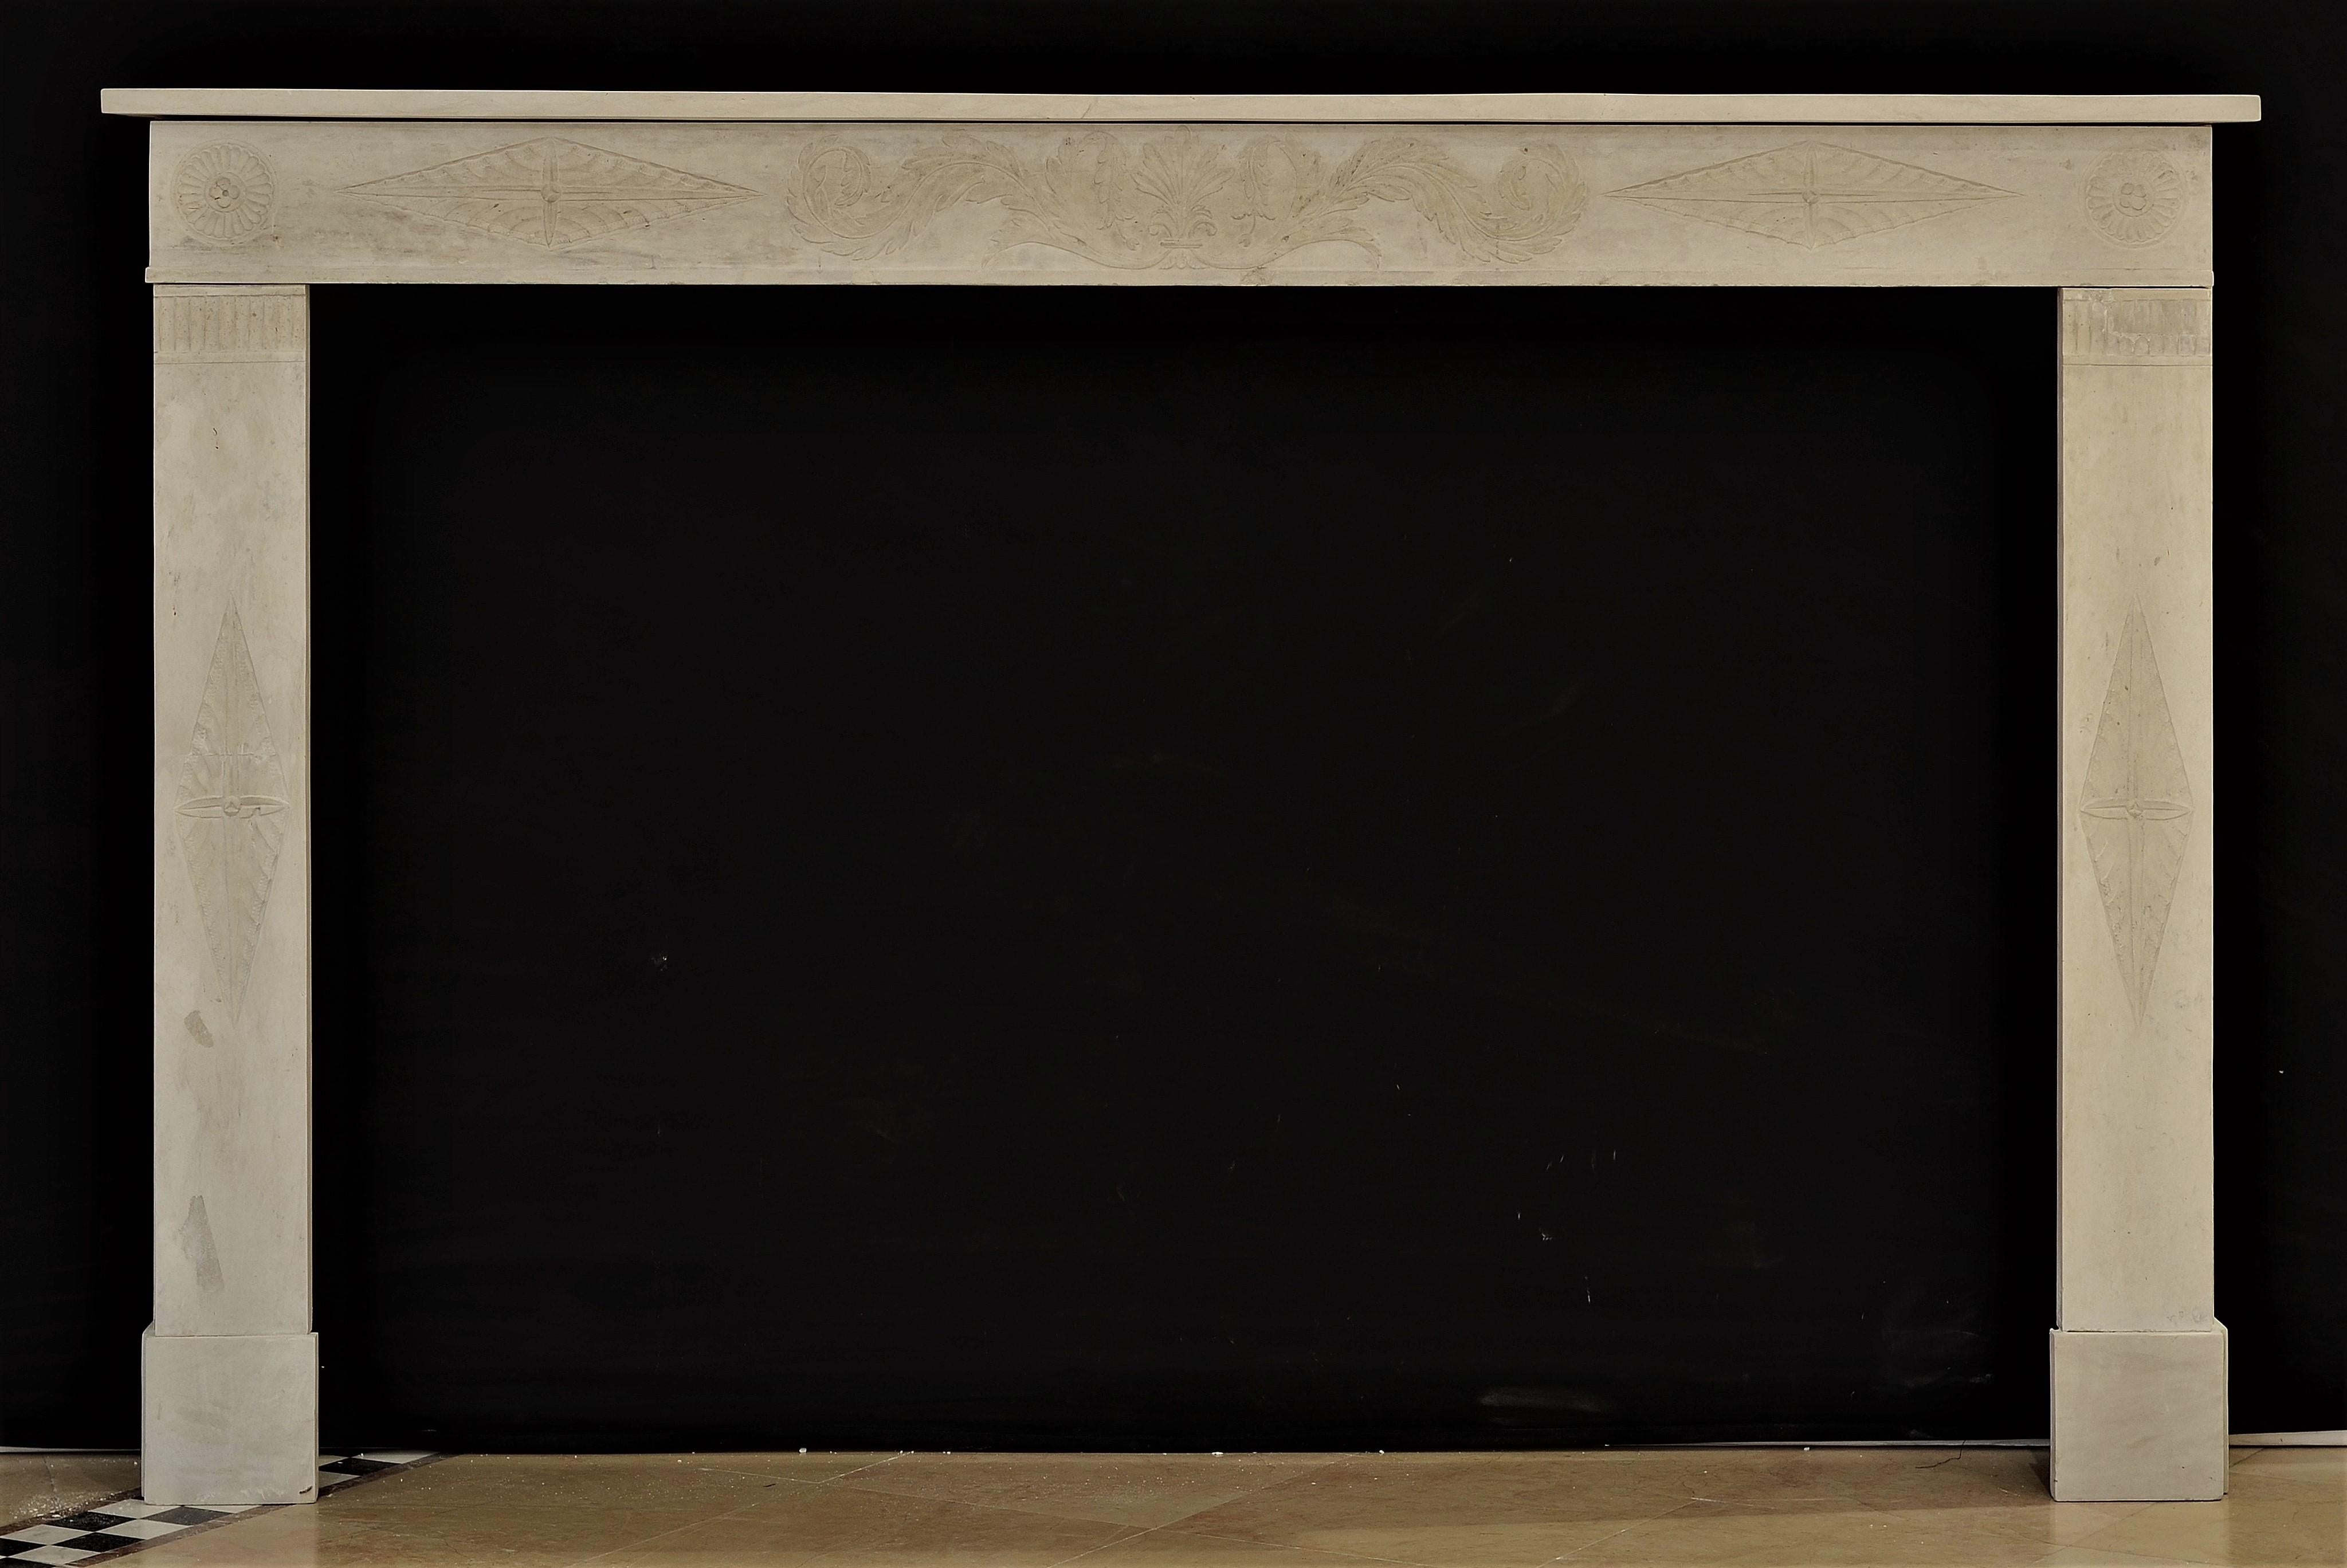 Antique fireplace mantel 19th century limestone Louis XVI from France
Finely carved Louis XVI in very soft toned and warm grayish limestone from France .
Beautifully decorated and finely carved frieze, central foliage flanked by diamond